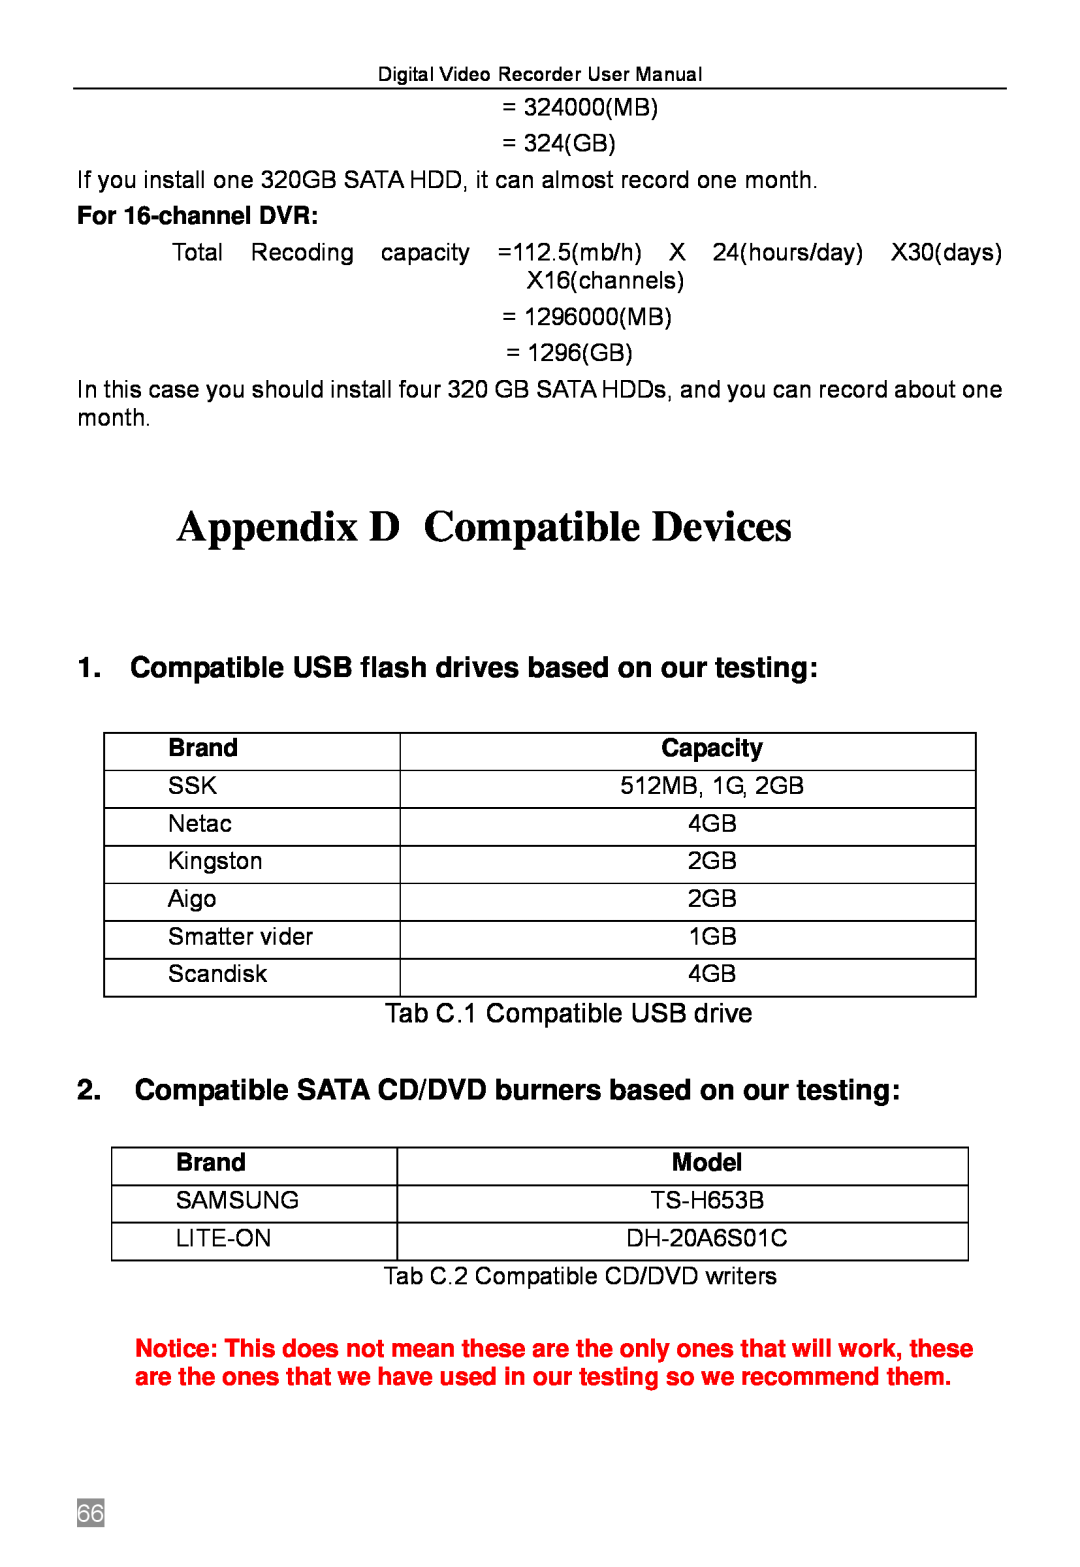 Q-See QSTD2408 Appendix D Compatible Devices, Compatible USB flash drives based on our testing, For 16-channel DVR, Brand 